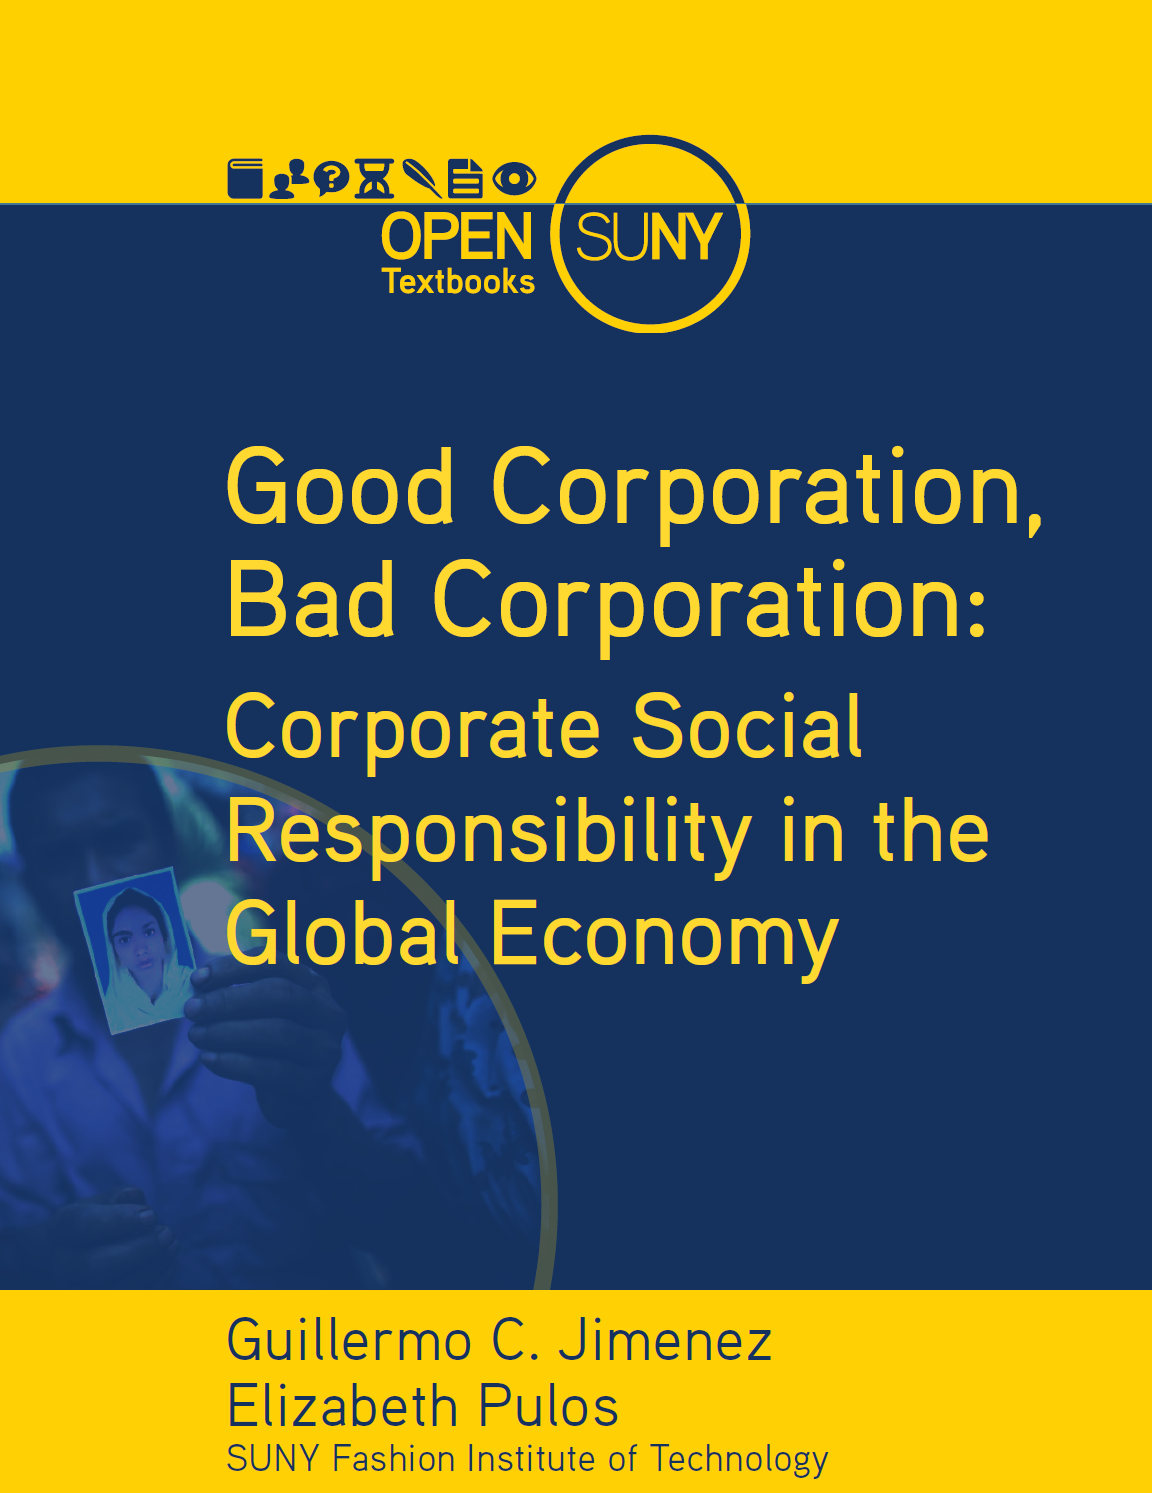 Read more about Good Corporation, Bad Corporation: Corporate Social Responsibility in the Global Economy